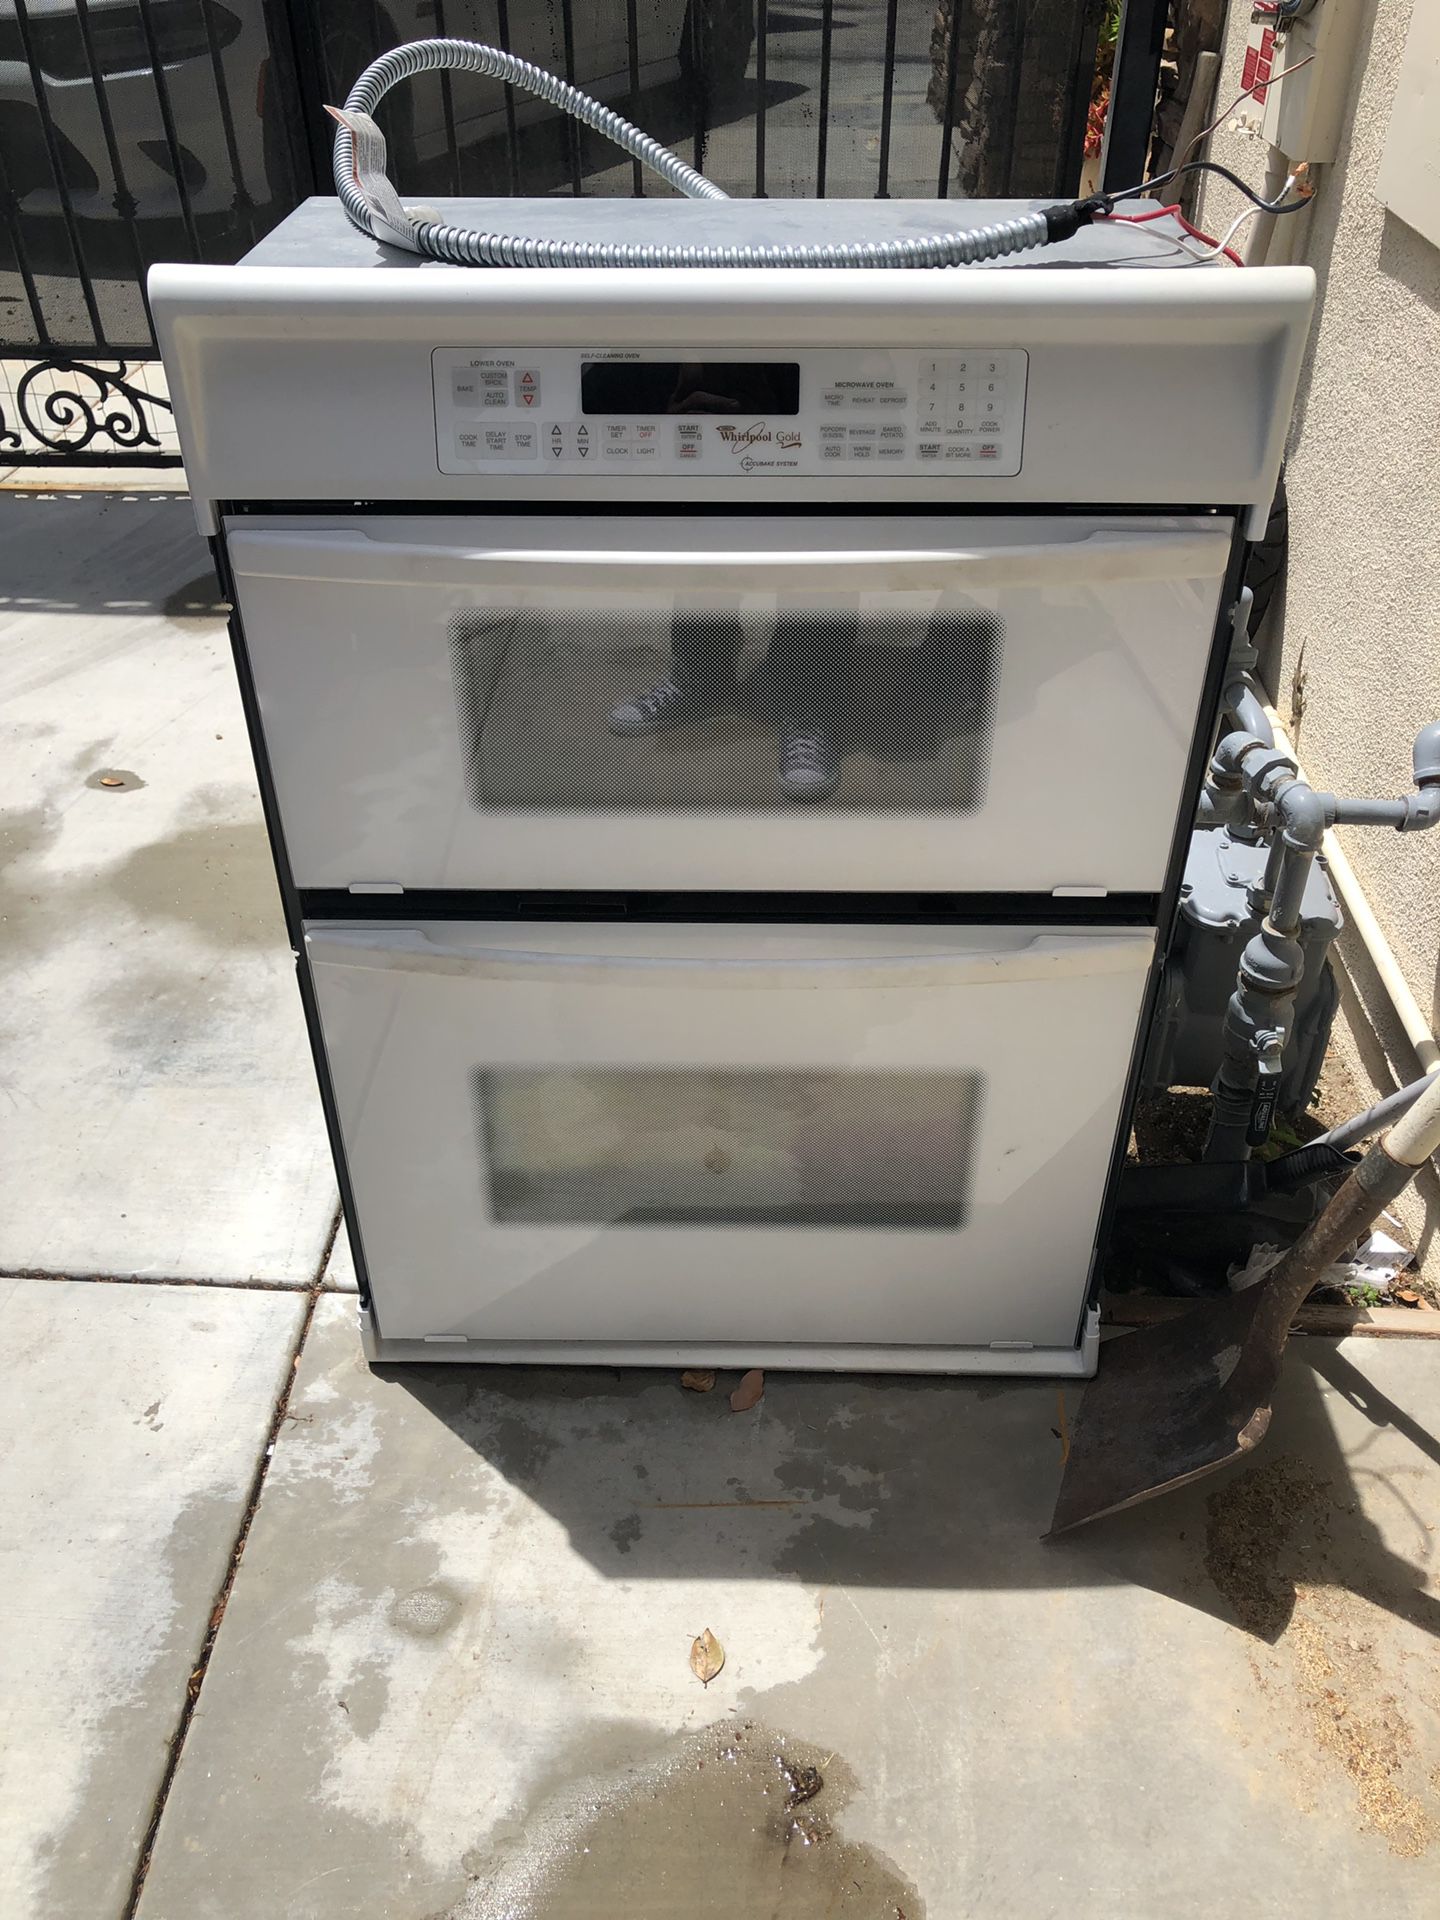 Oven - Microwave combo appliance